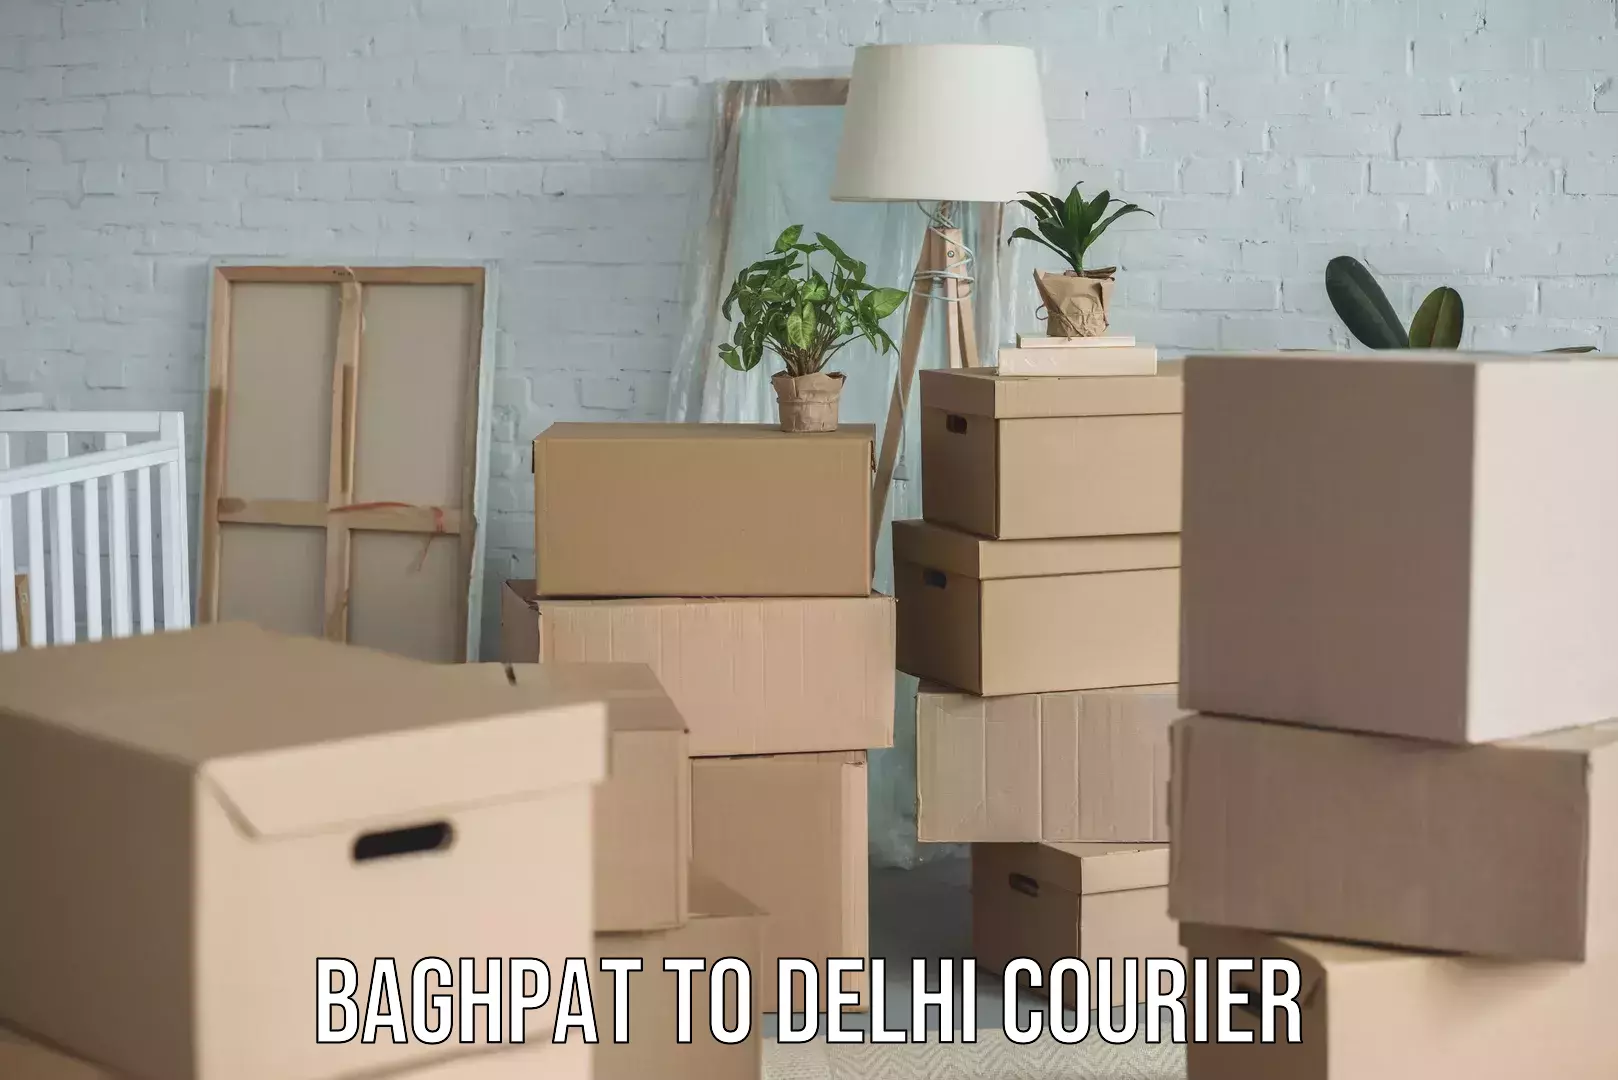 Reliable delivery network Baghpat to Delhi